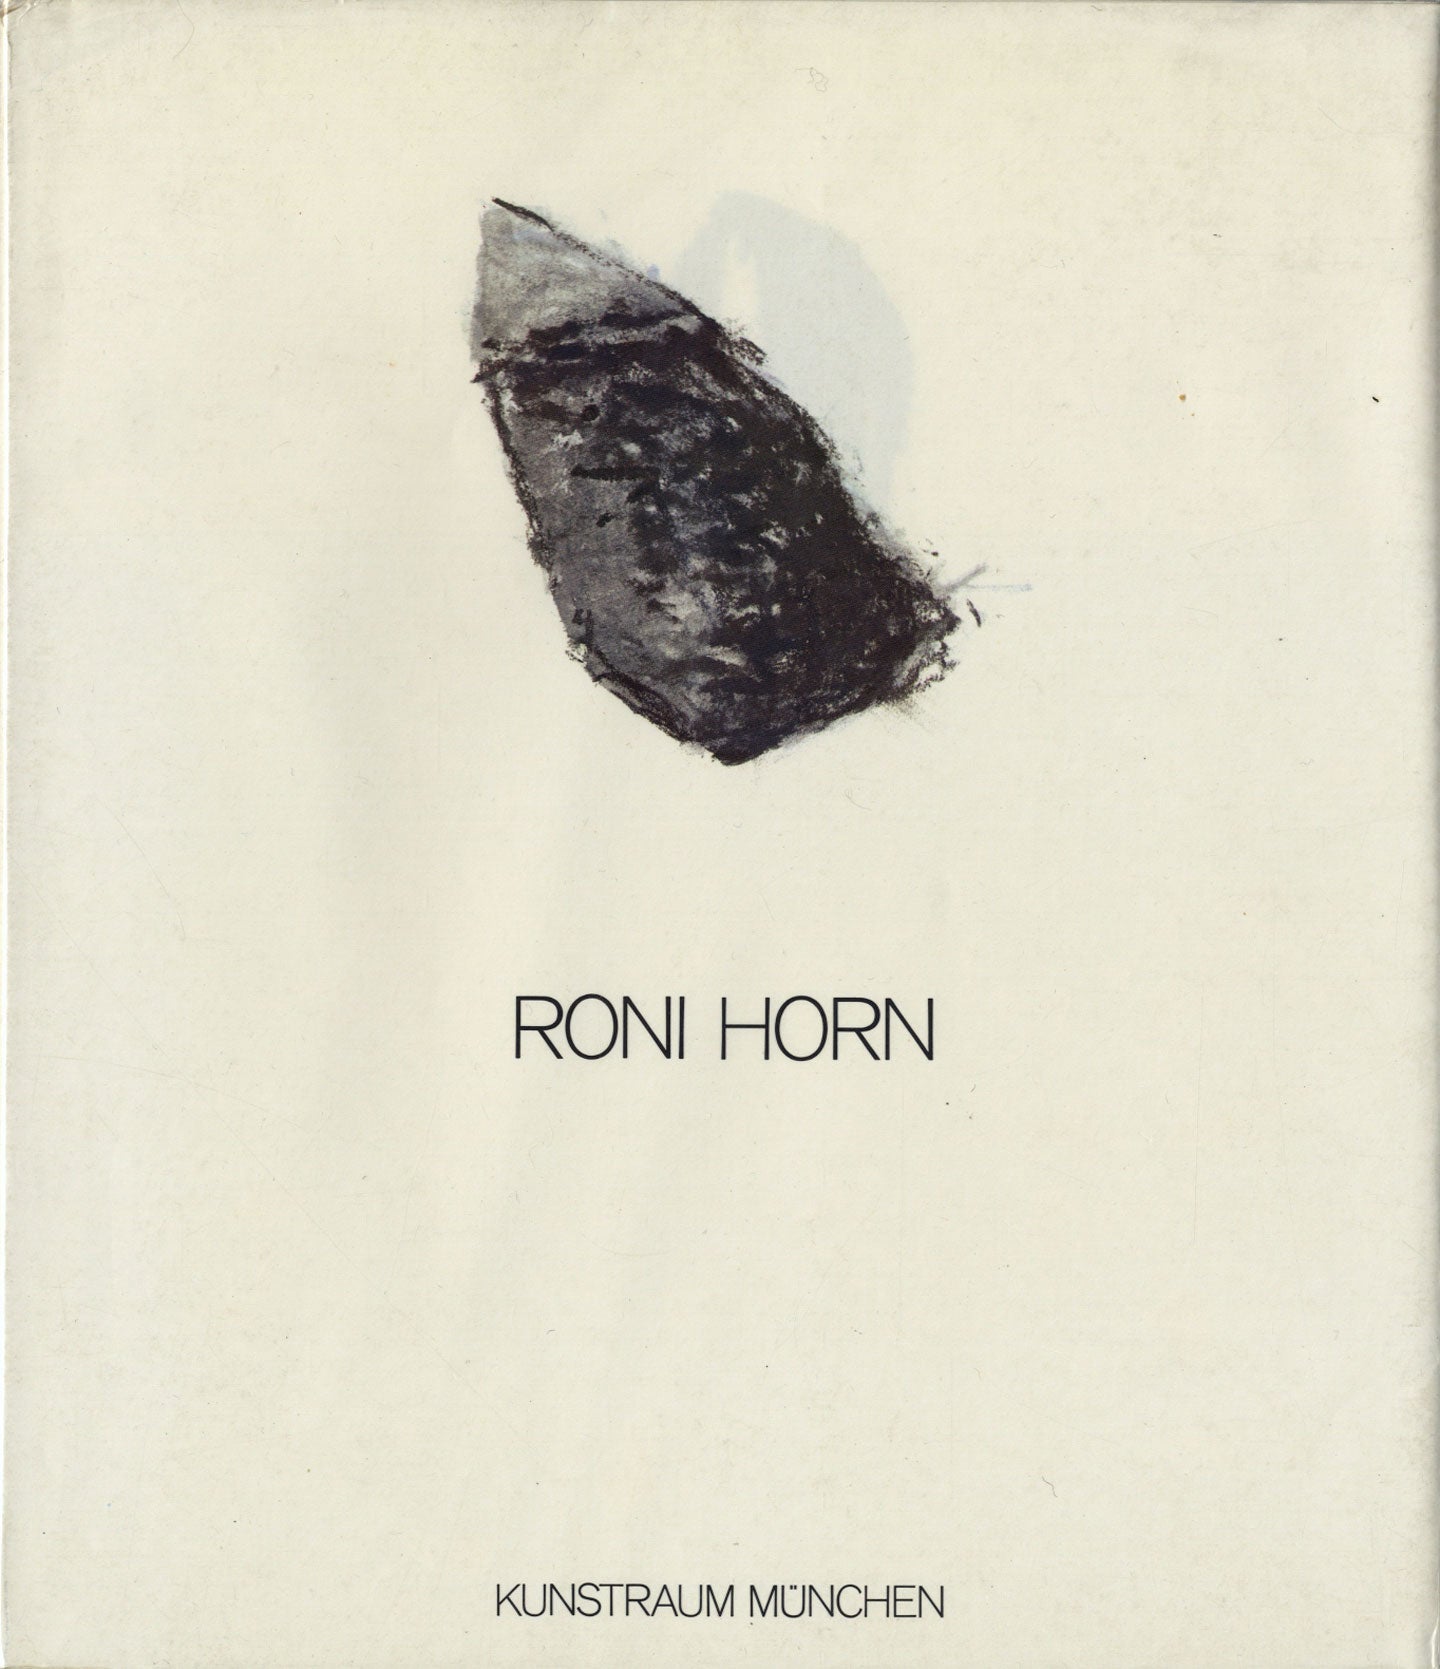 Roni Horn (Kunstraum München, 1983) [SIGNED]